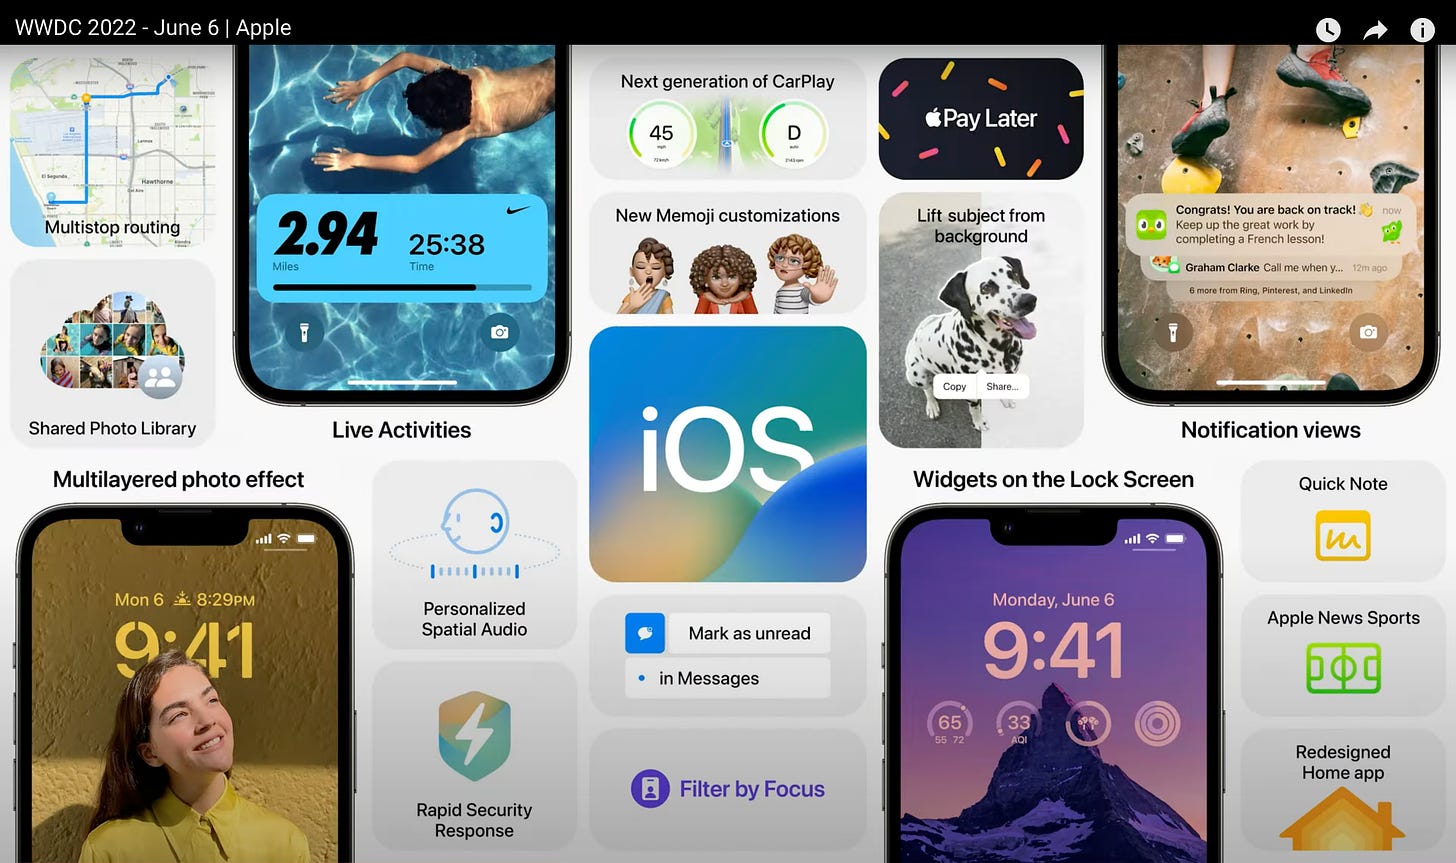 Screenshot of iOS features from WWDC2022 keynote.